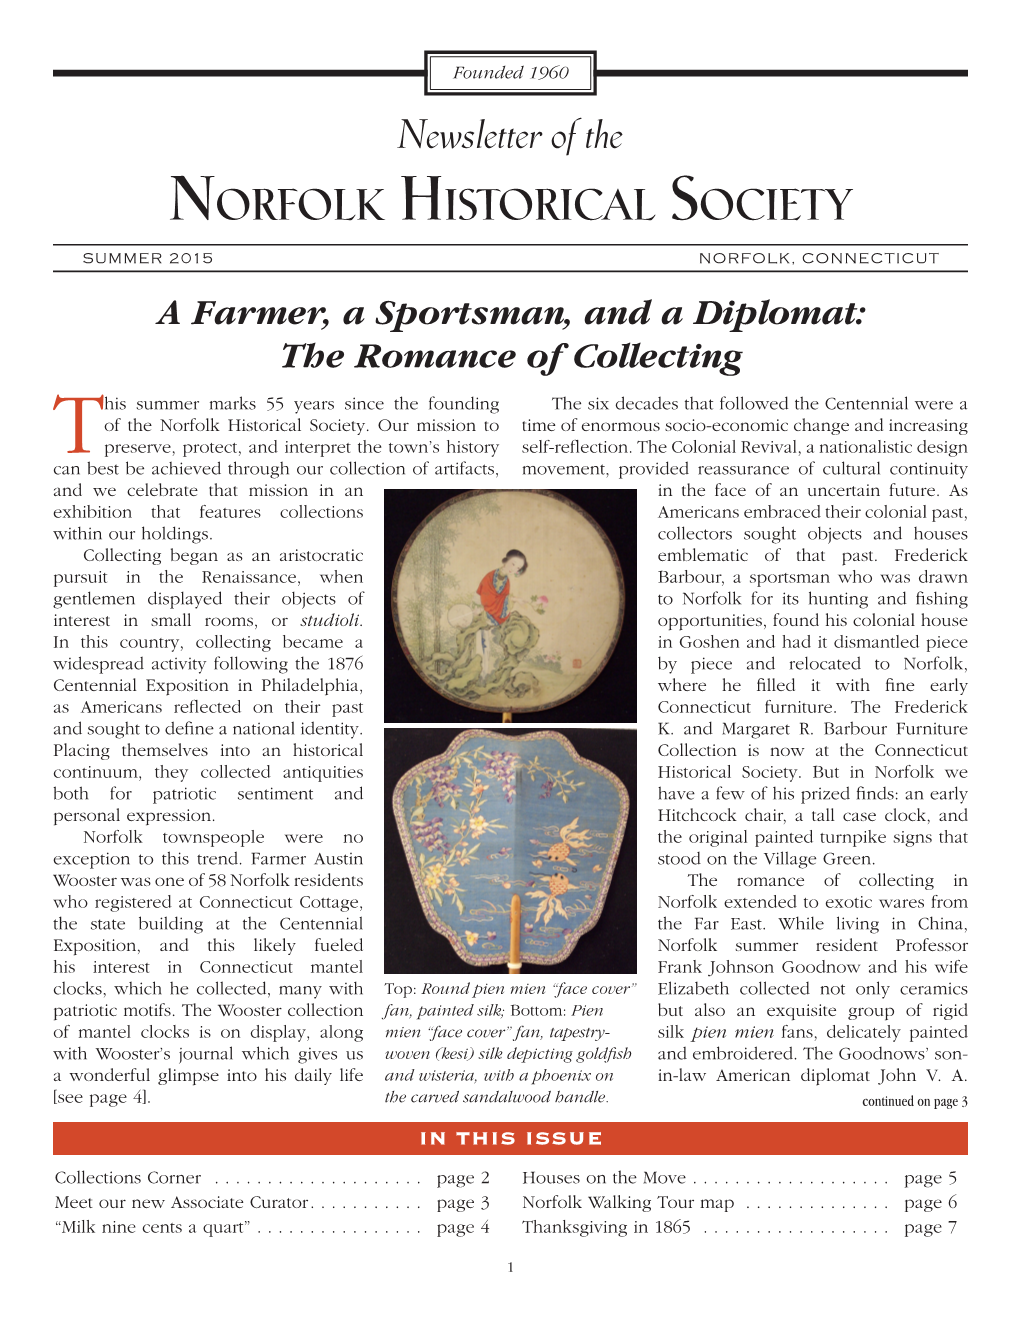 SUMMER 2015 NORFOLK, CONNECTICUT a Farmer, a Sportsman, and a Diplomat: the Romance of Collecting